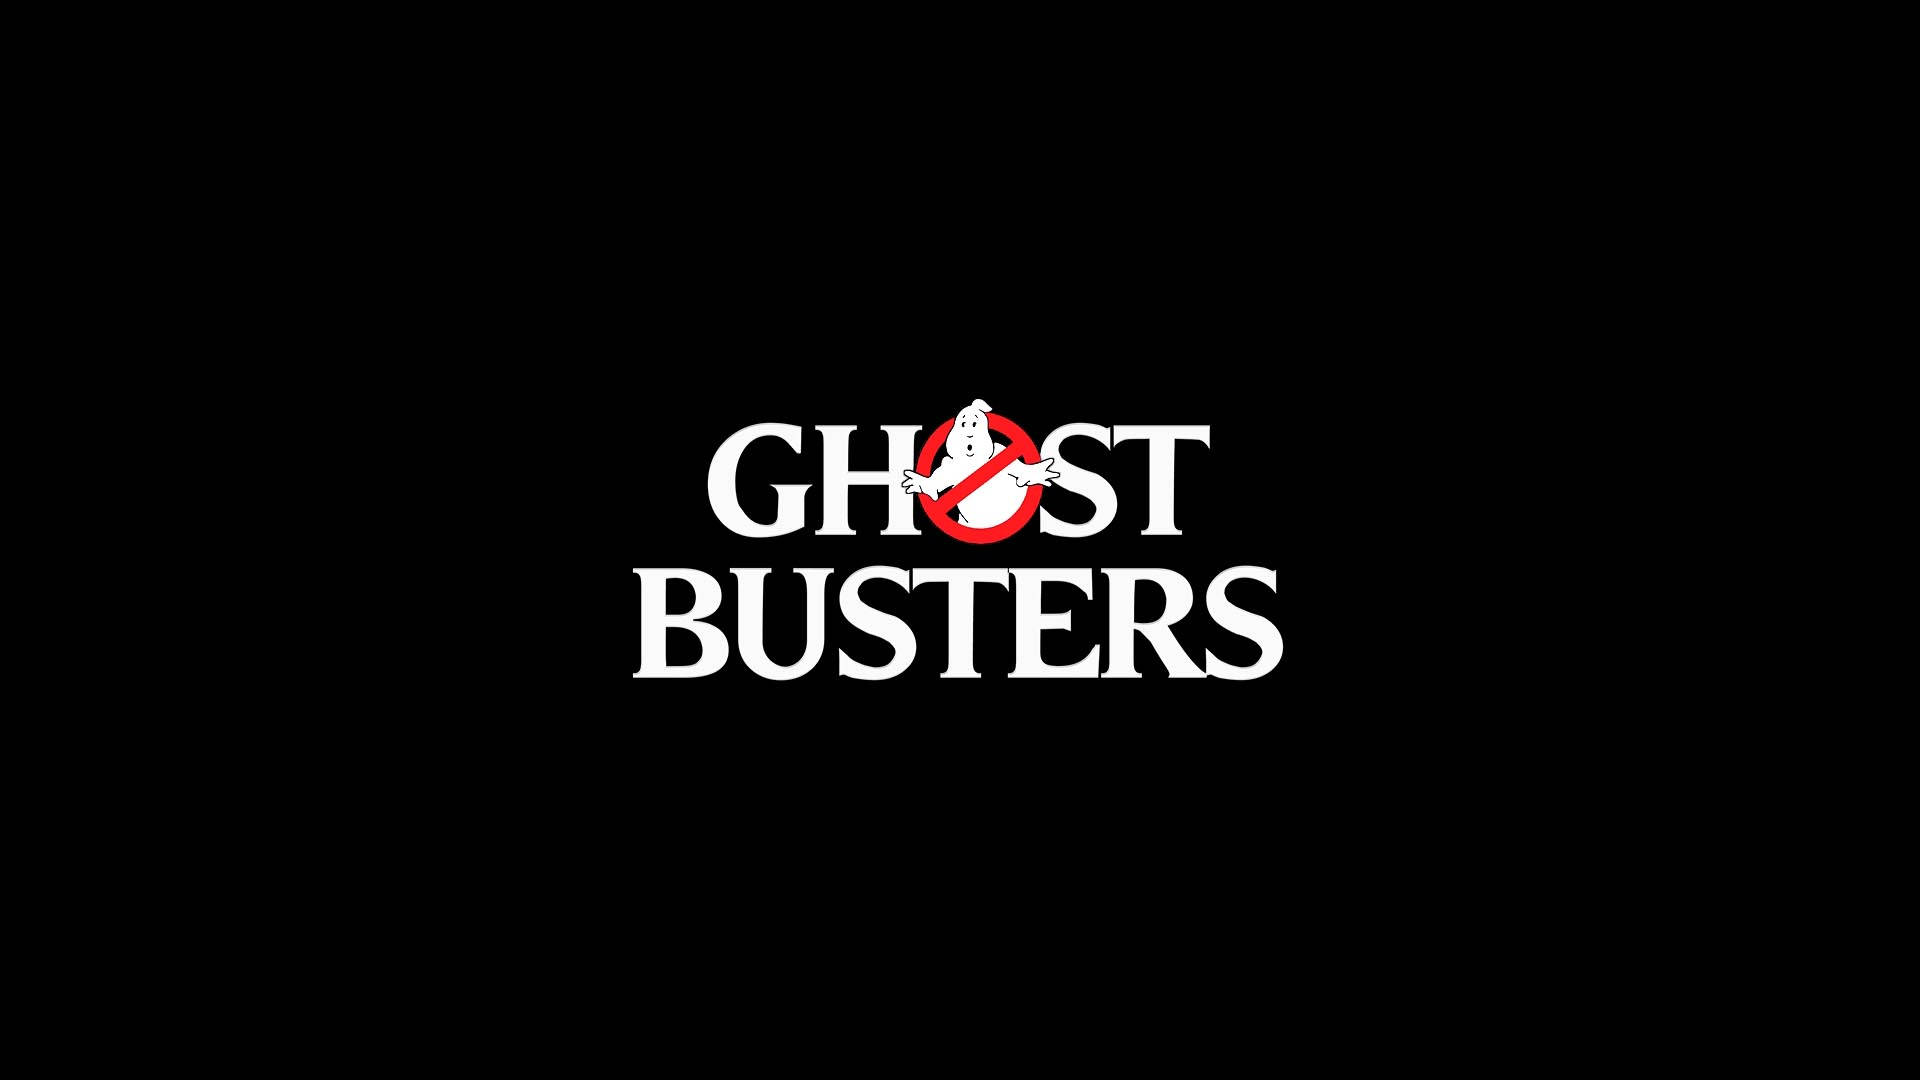 Ghostbusters Text Background